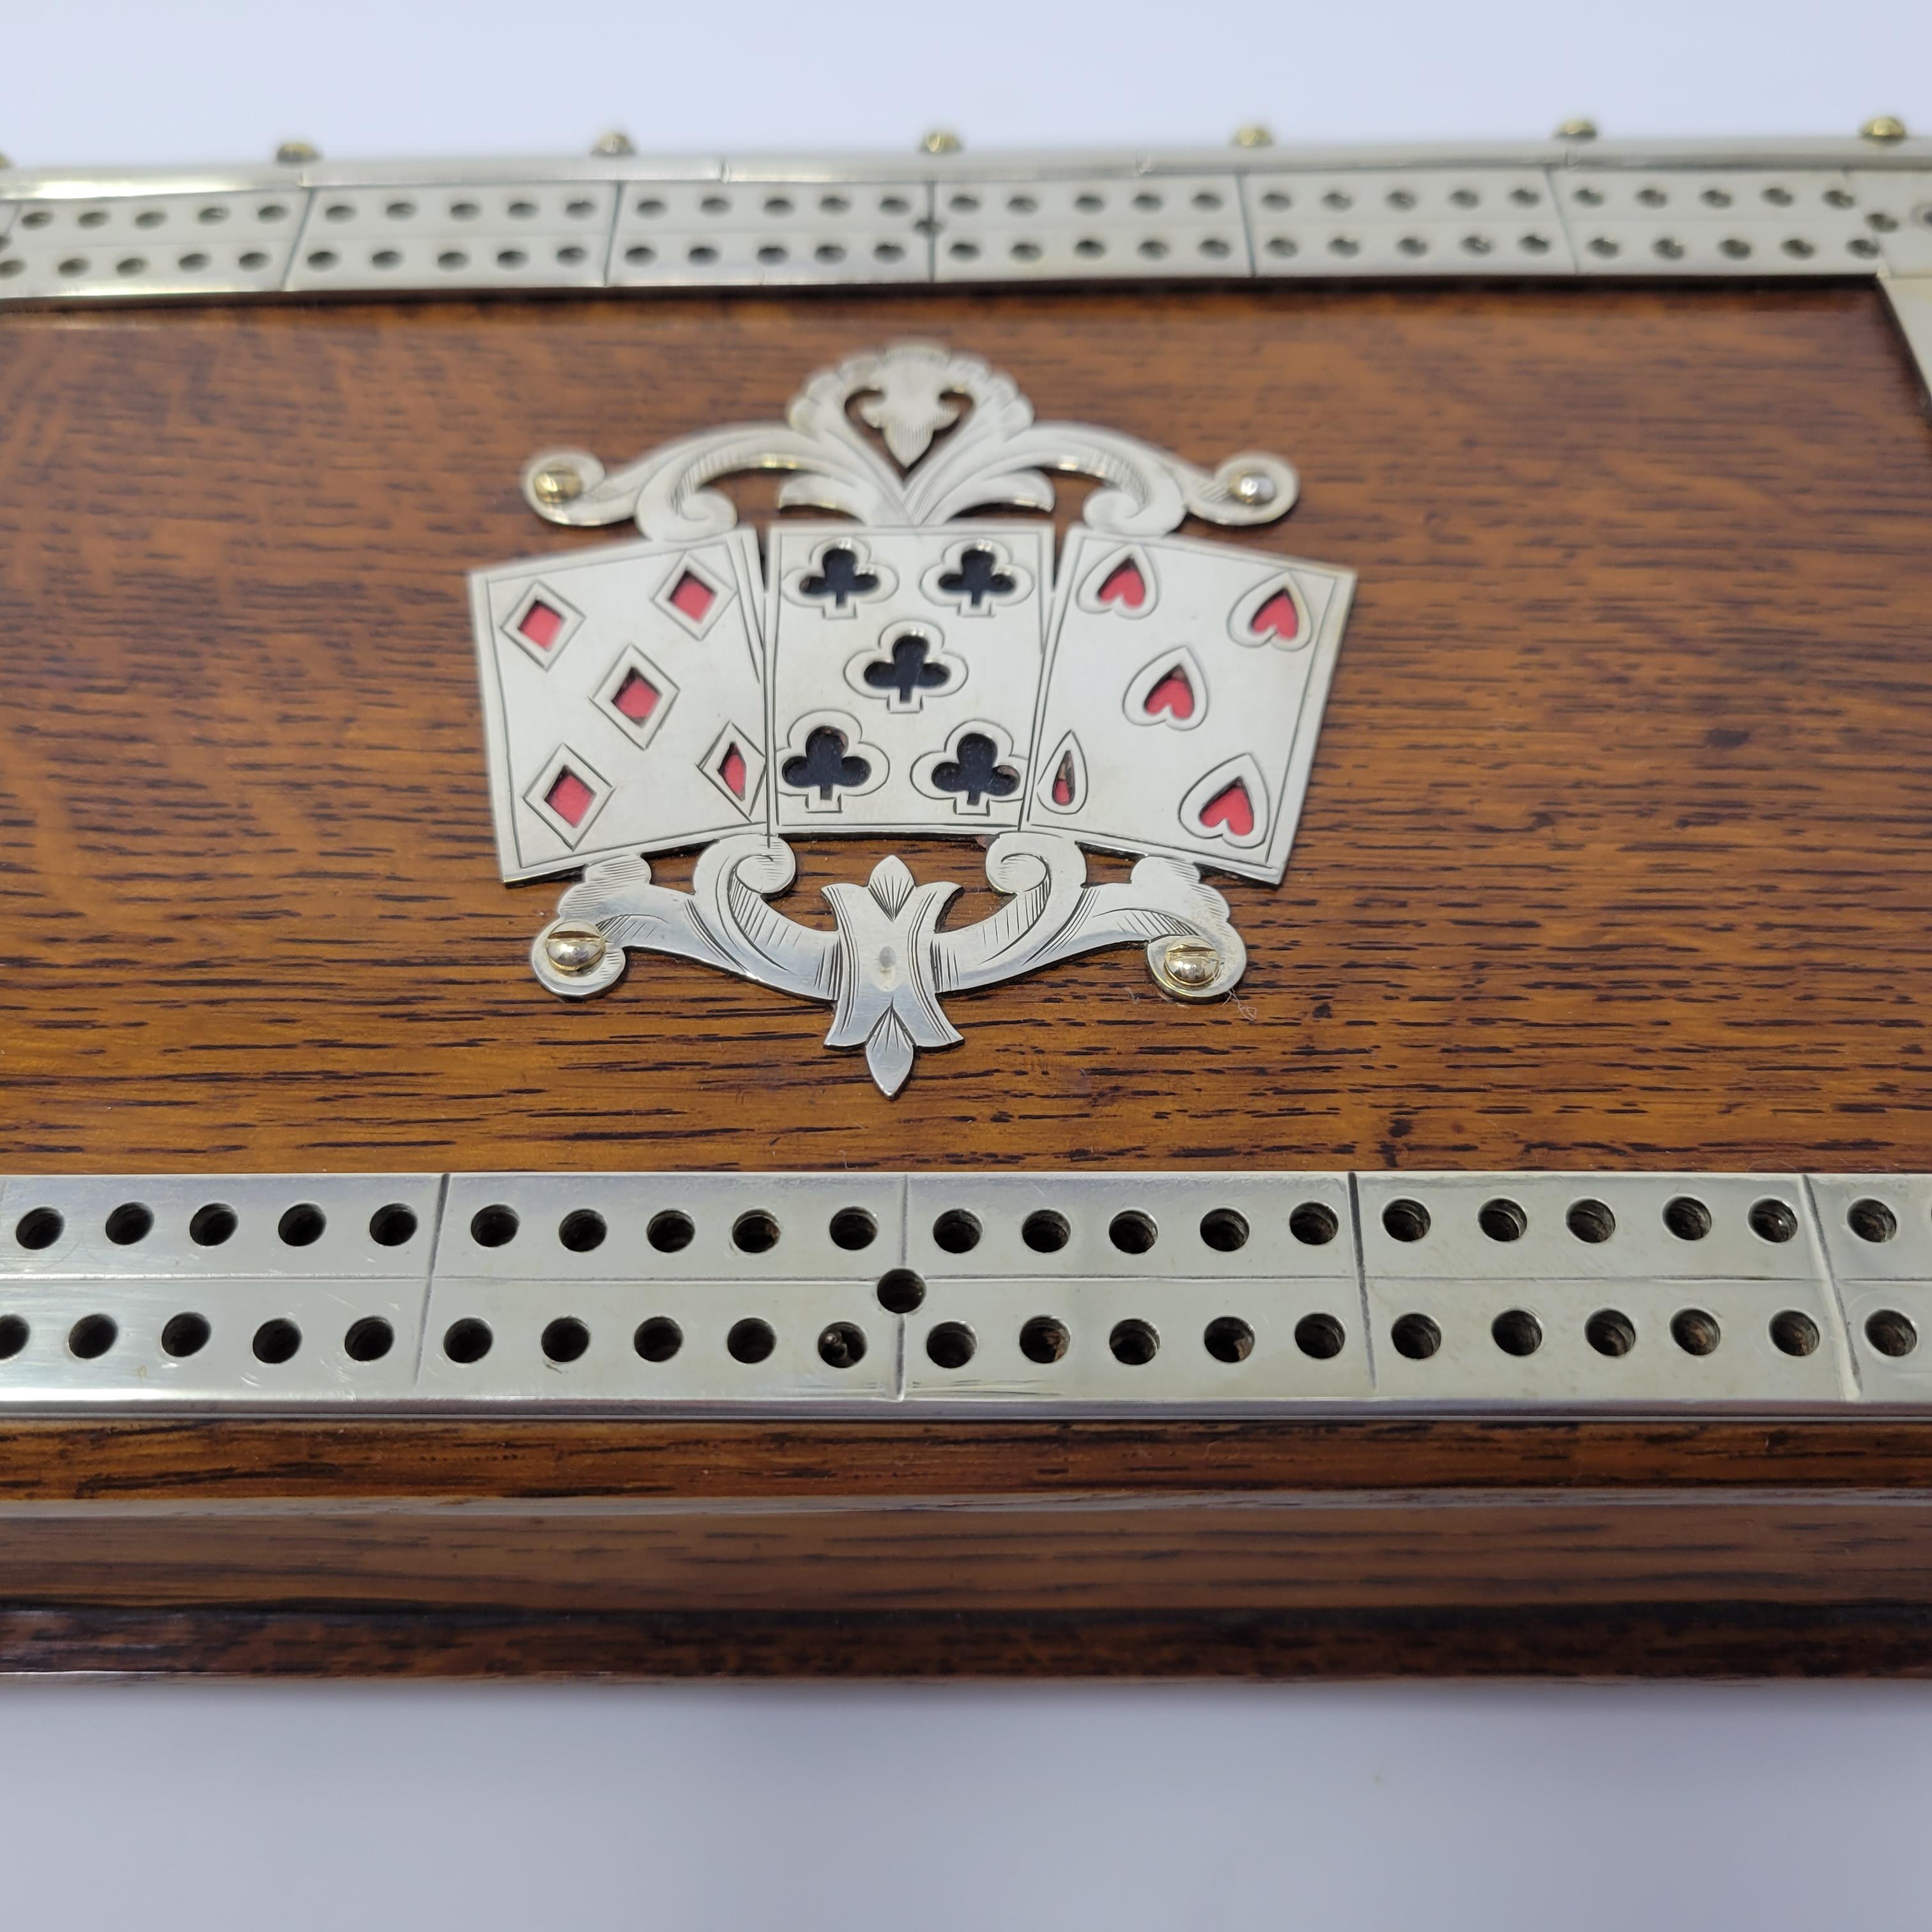 Nice little card box for playing games.